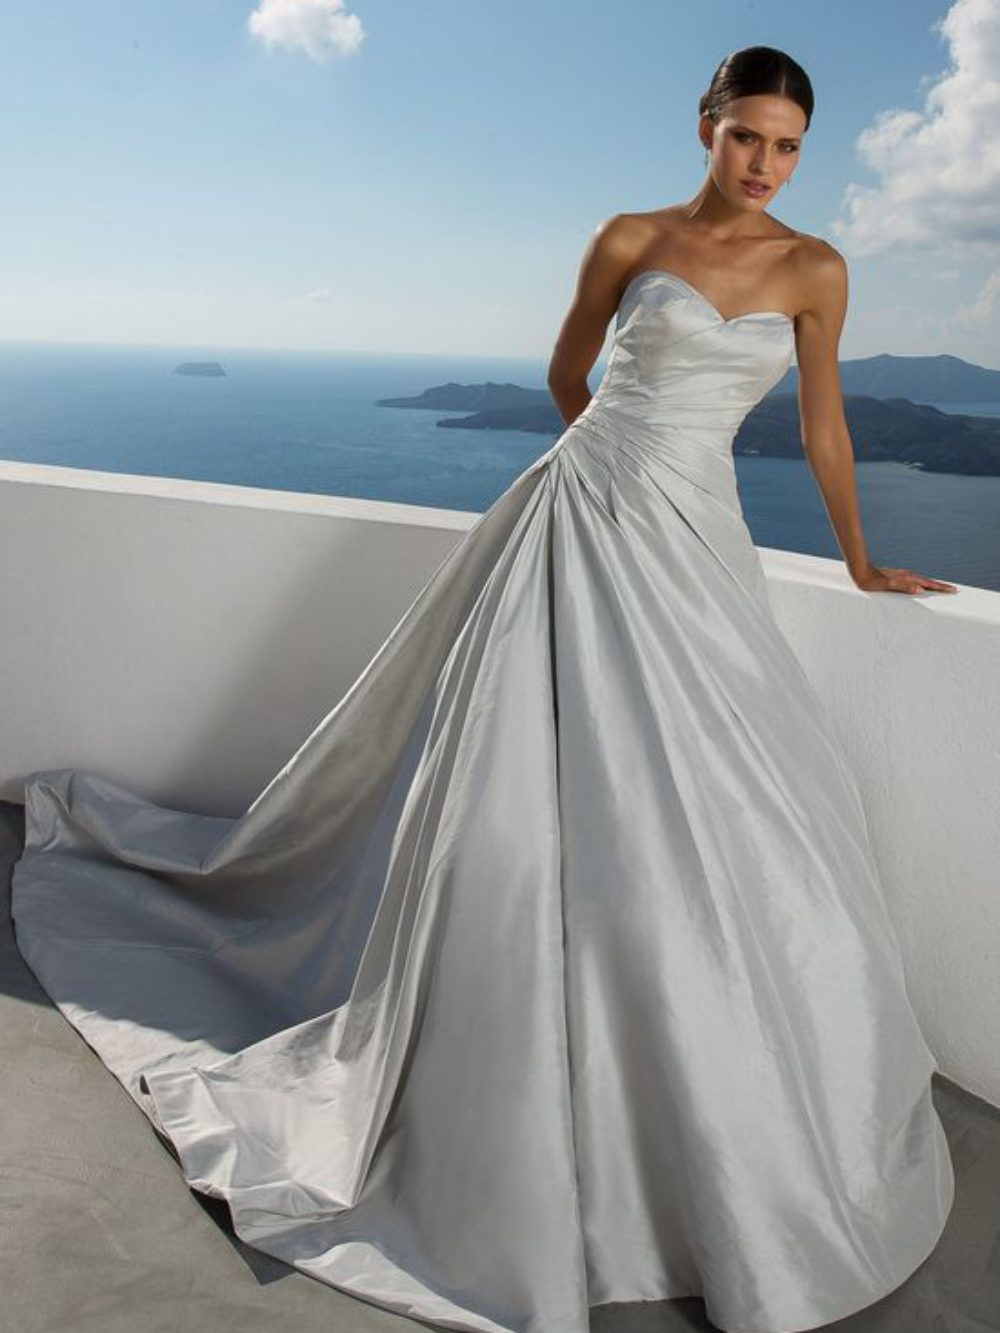 Amazing J Alexander Wedding Dress of all time Check it out now 